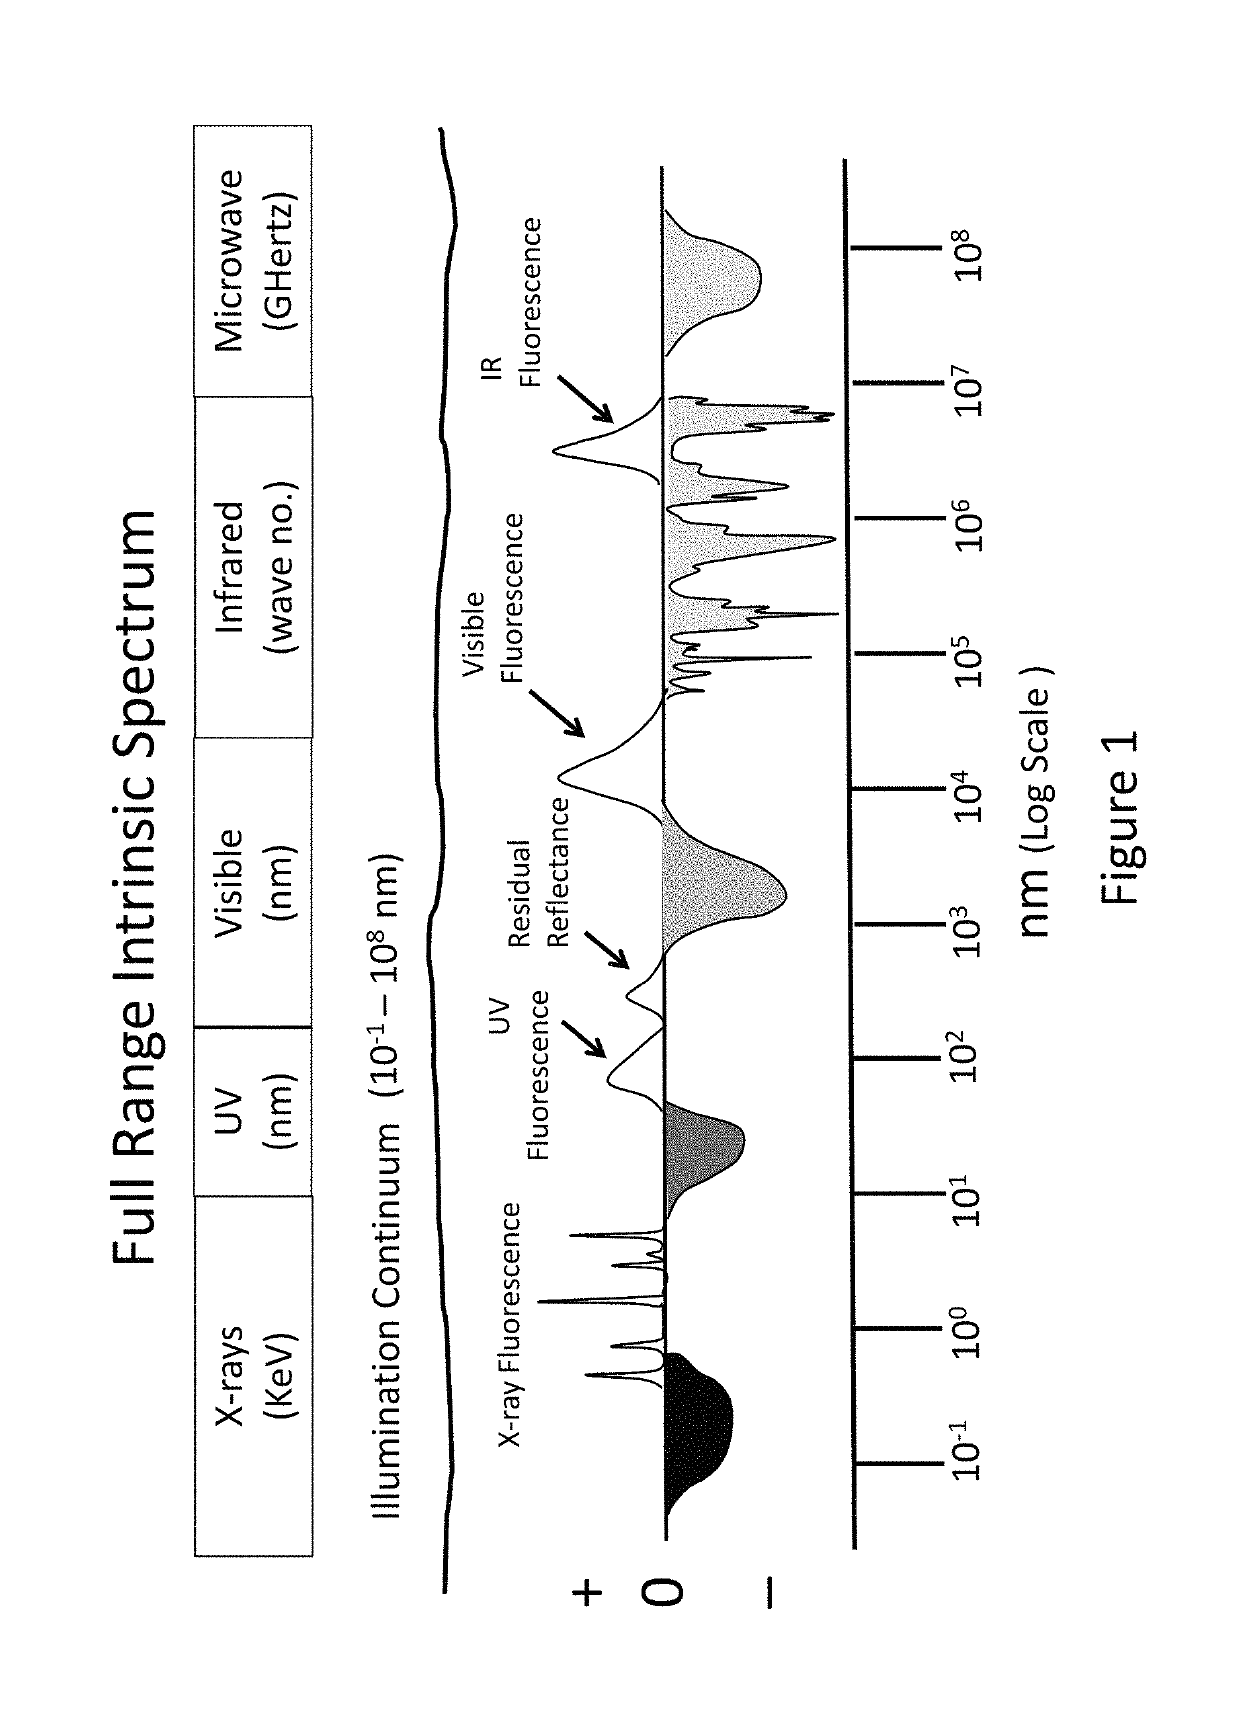 Method to obtain full range intrinsic spectral signatures for spectroscopy and spectral imaging